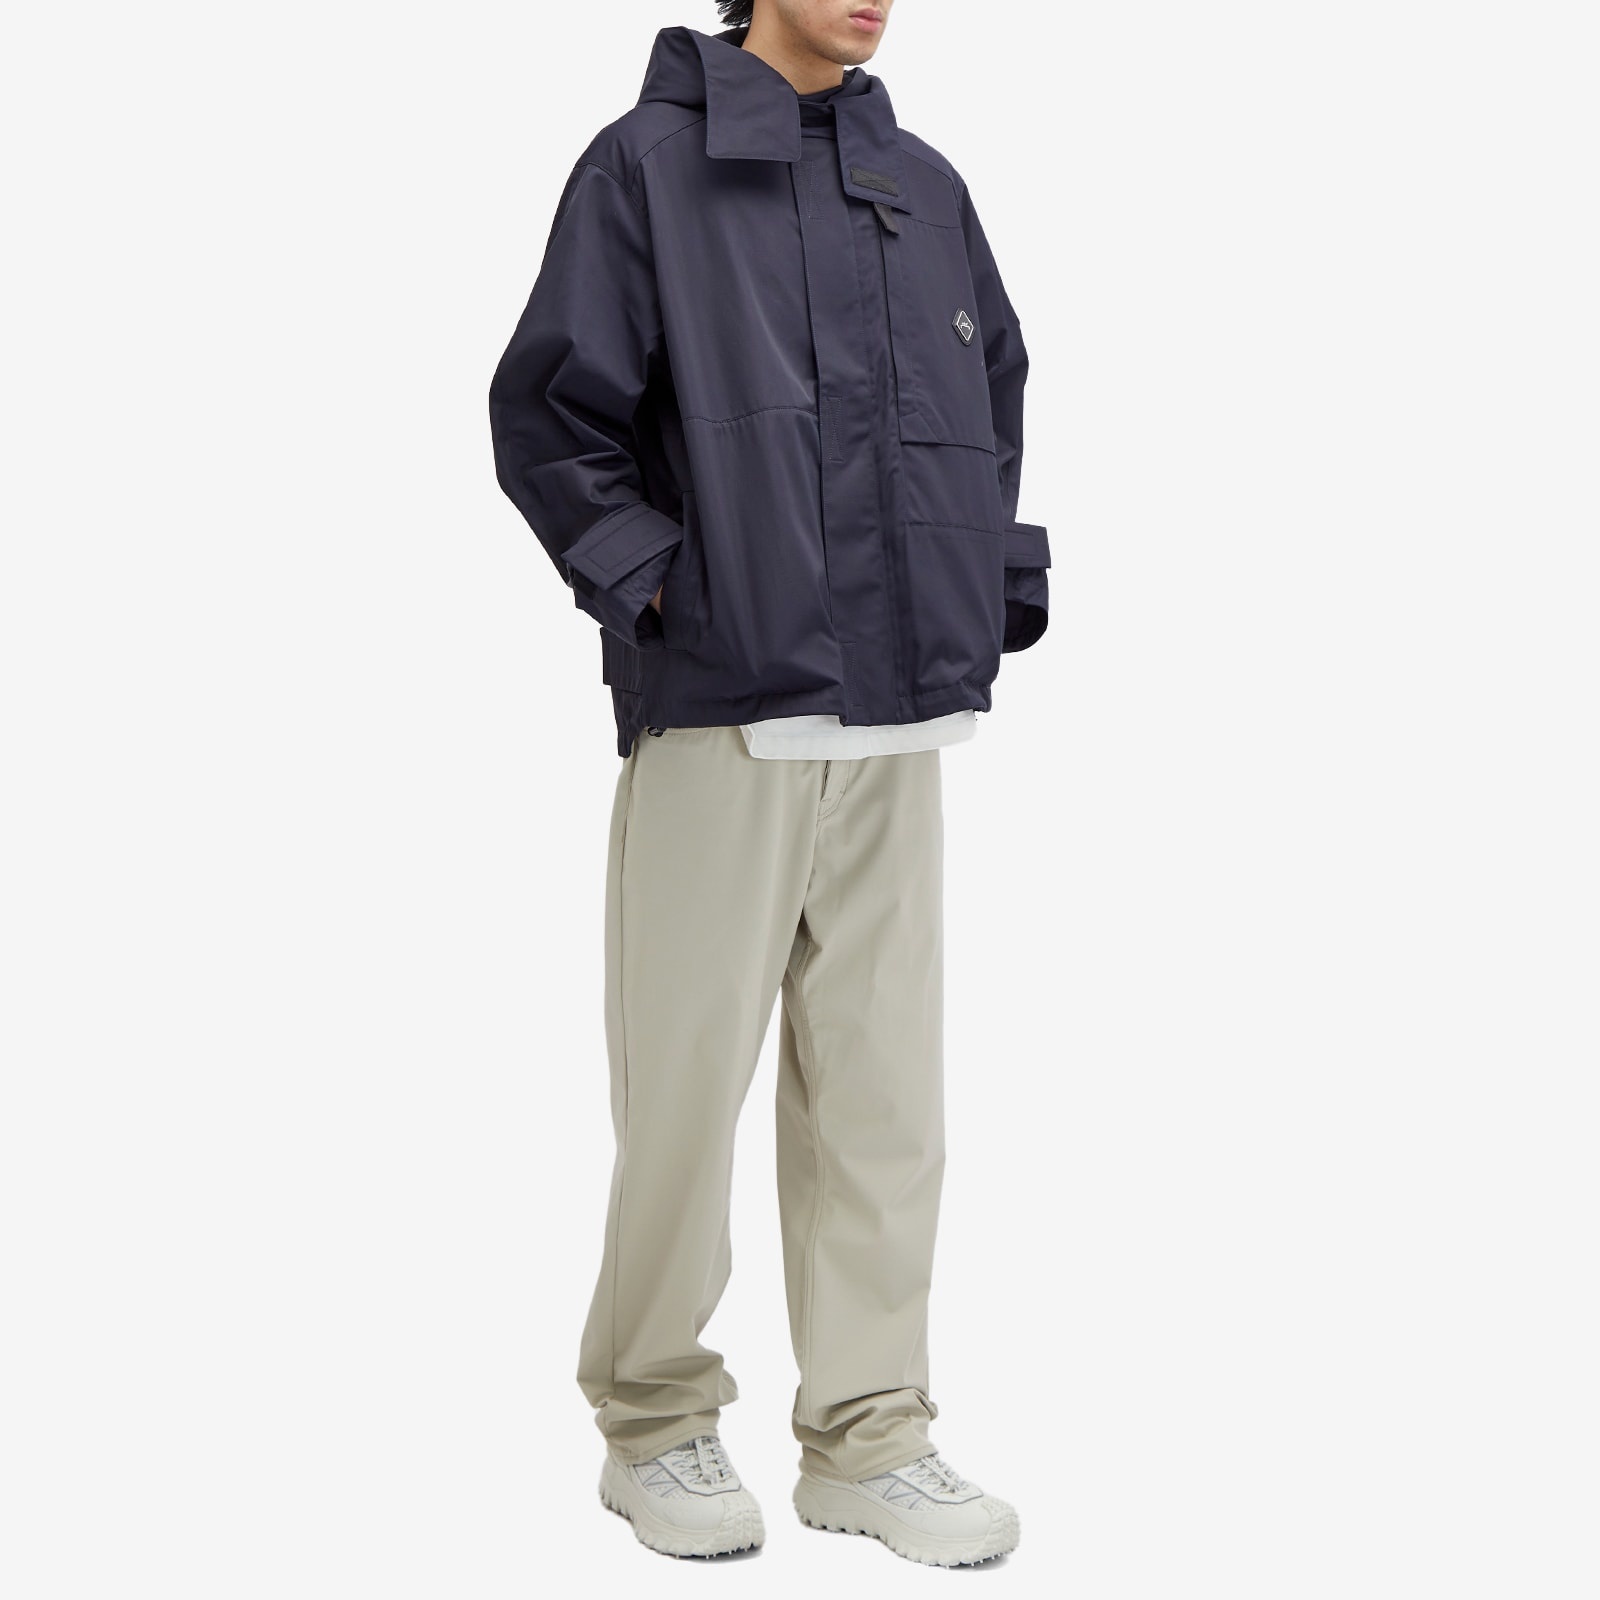 A-COLD-WALL* Gable Storm Jacket - 4